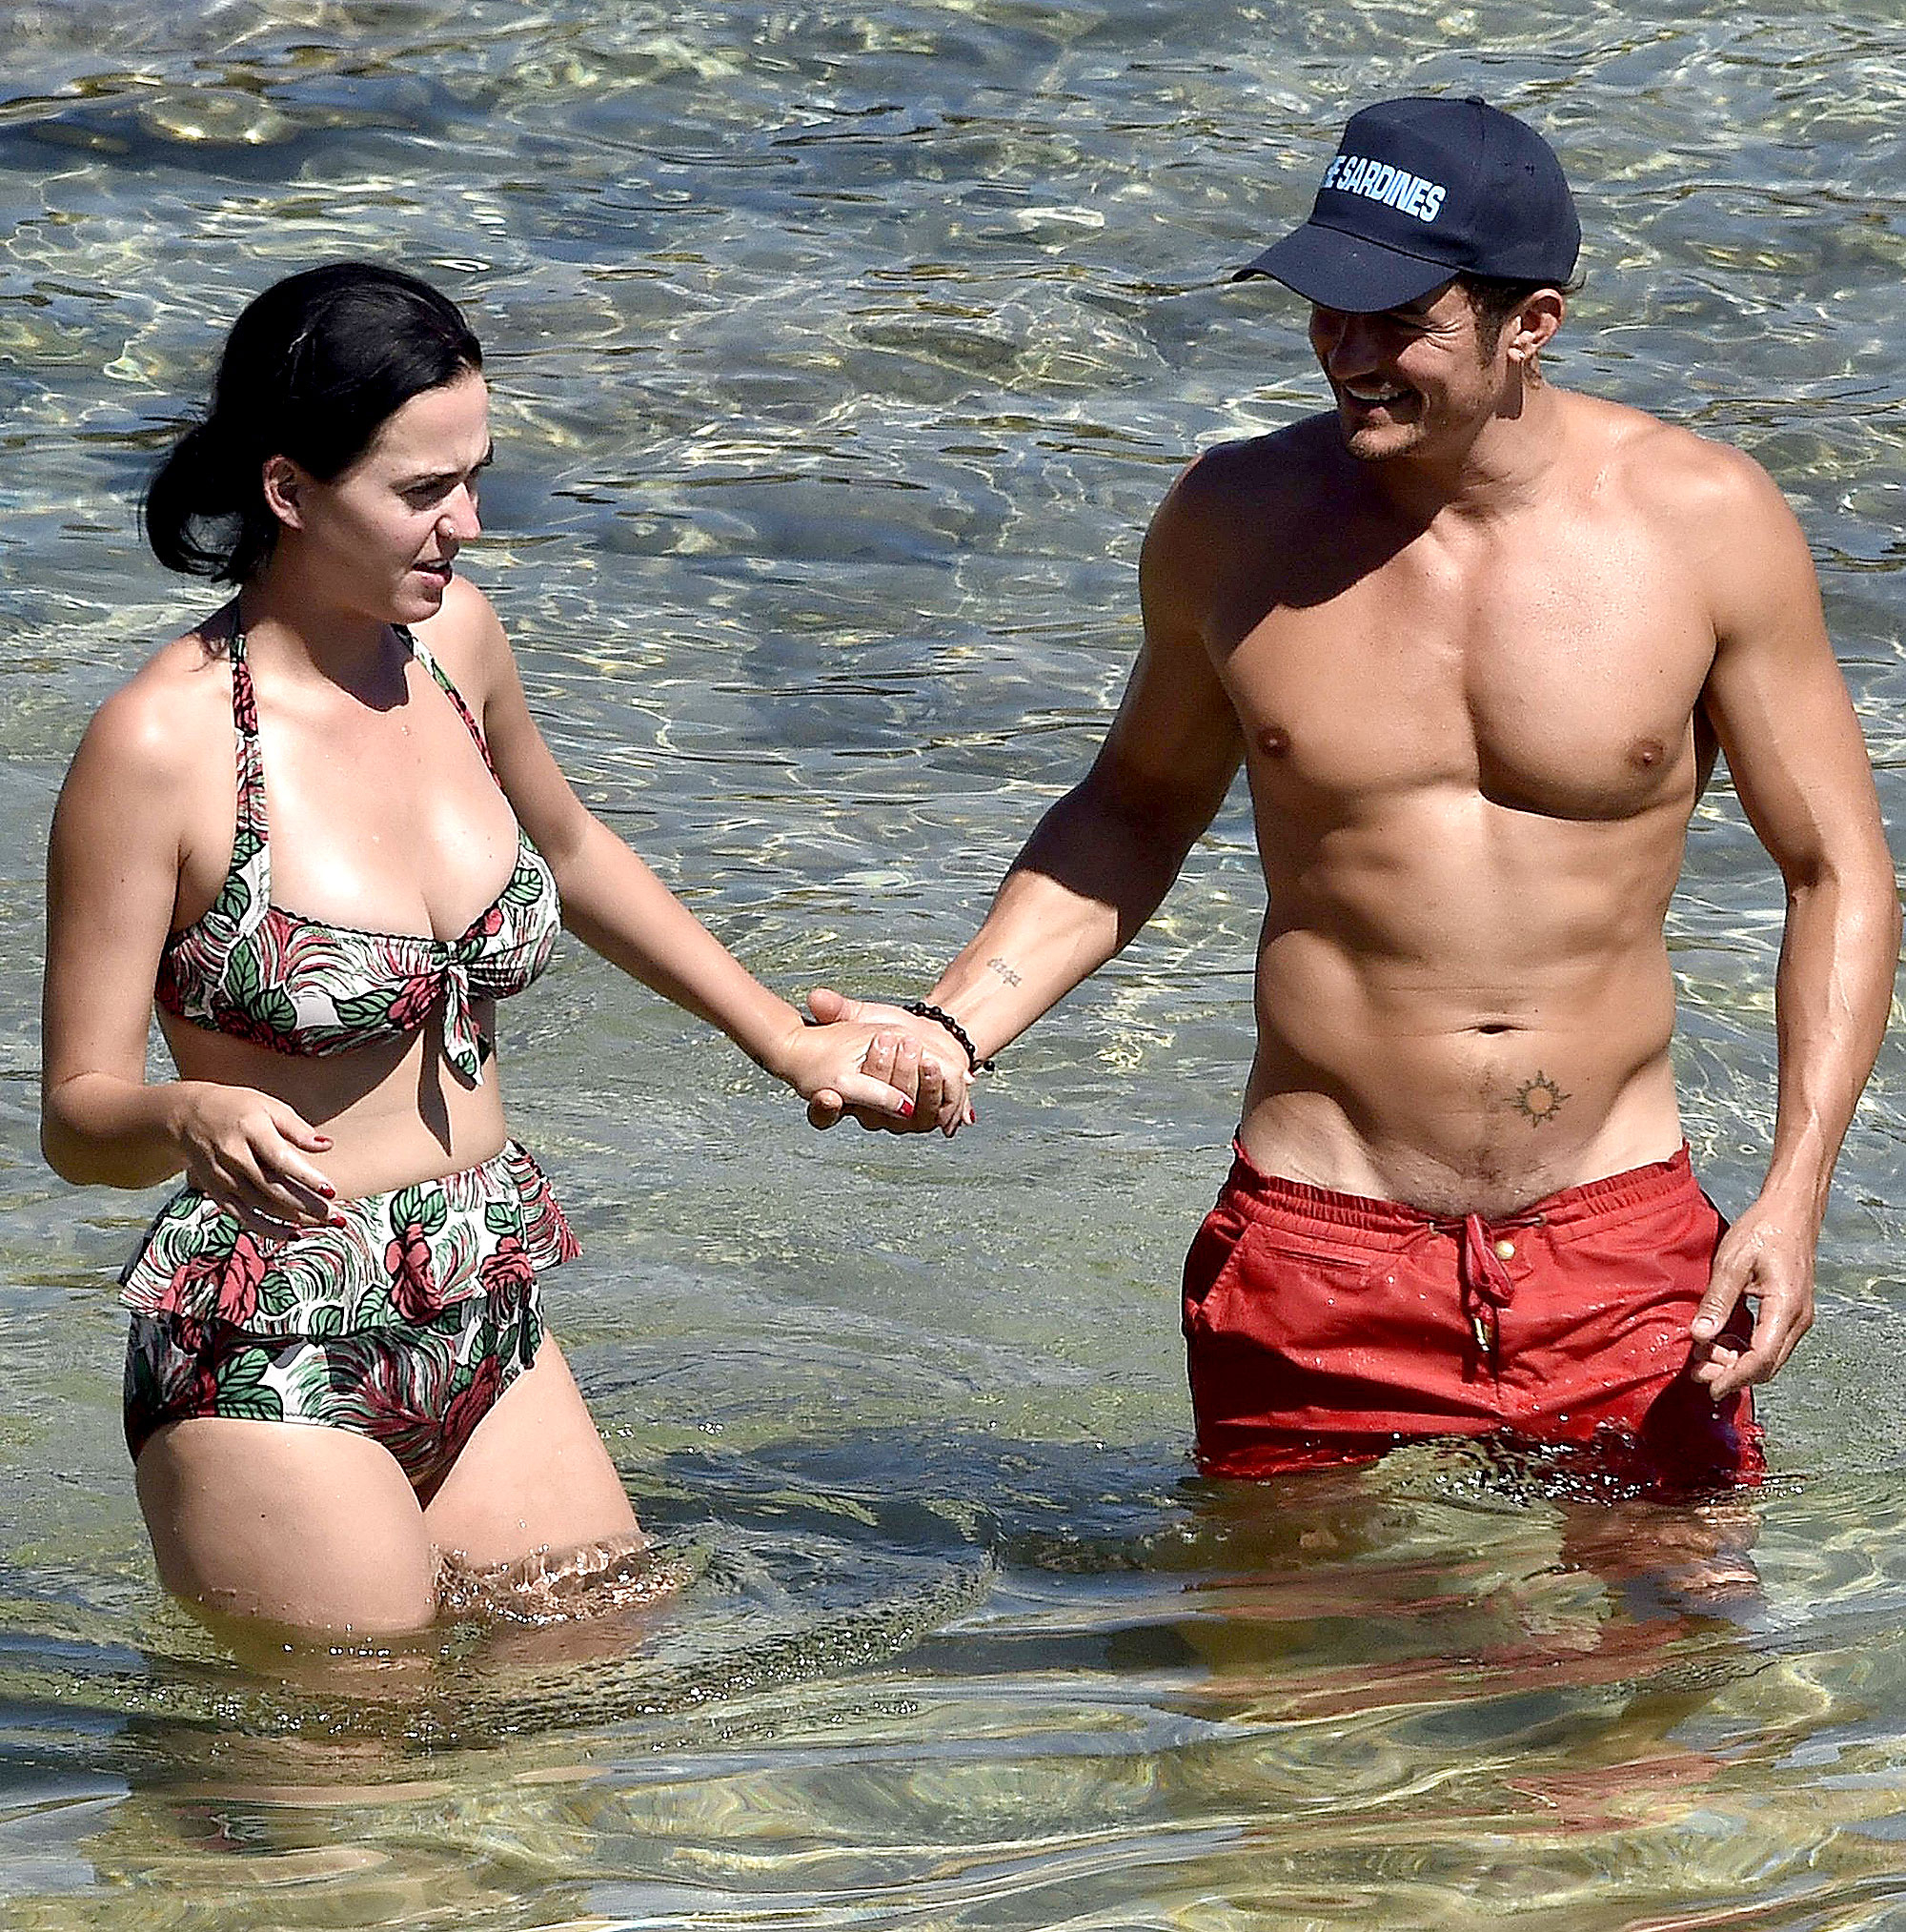 UNCENSORED: Orlando Bloom Paddles Naked In Italy Beach 